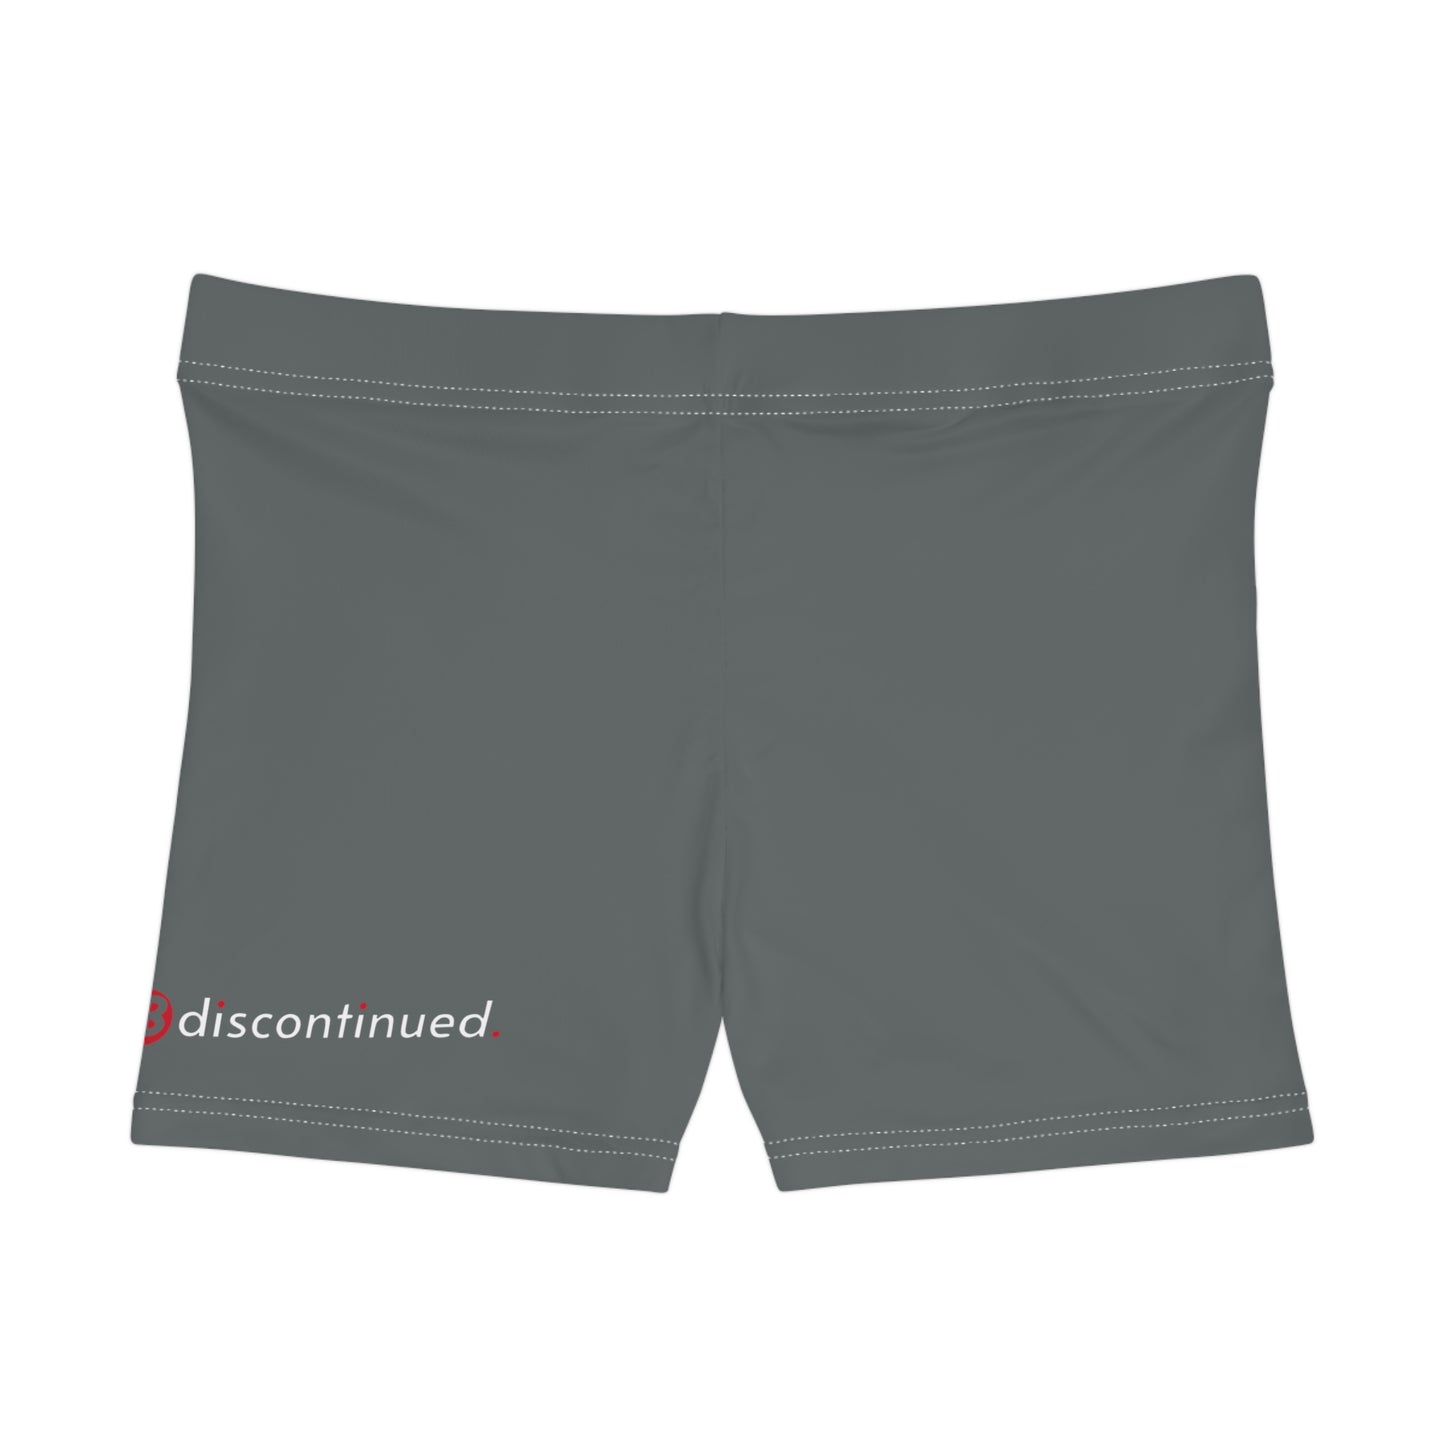 2Bdiscontinued. women's athletic shorts drkgry